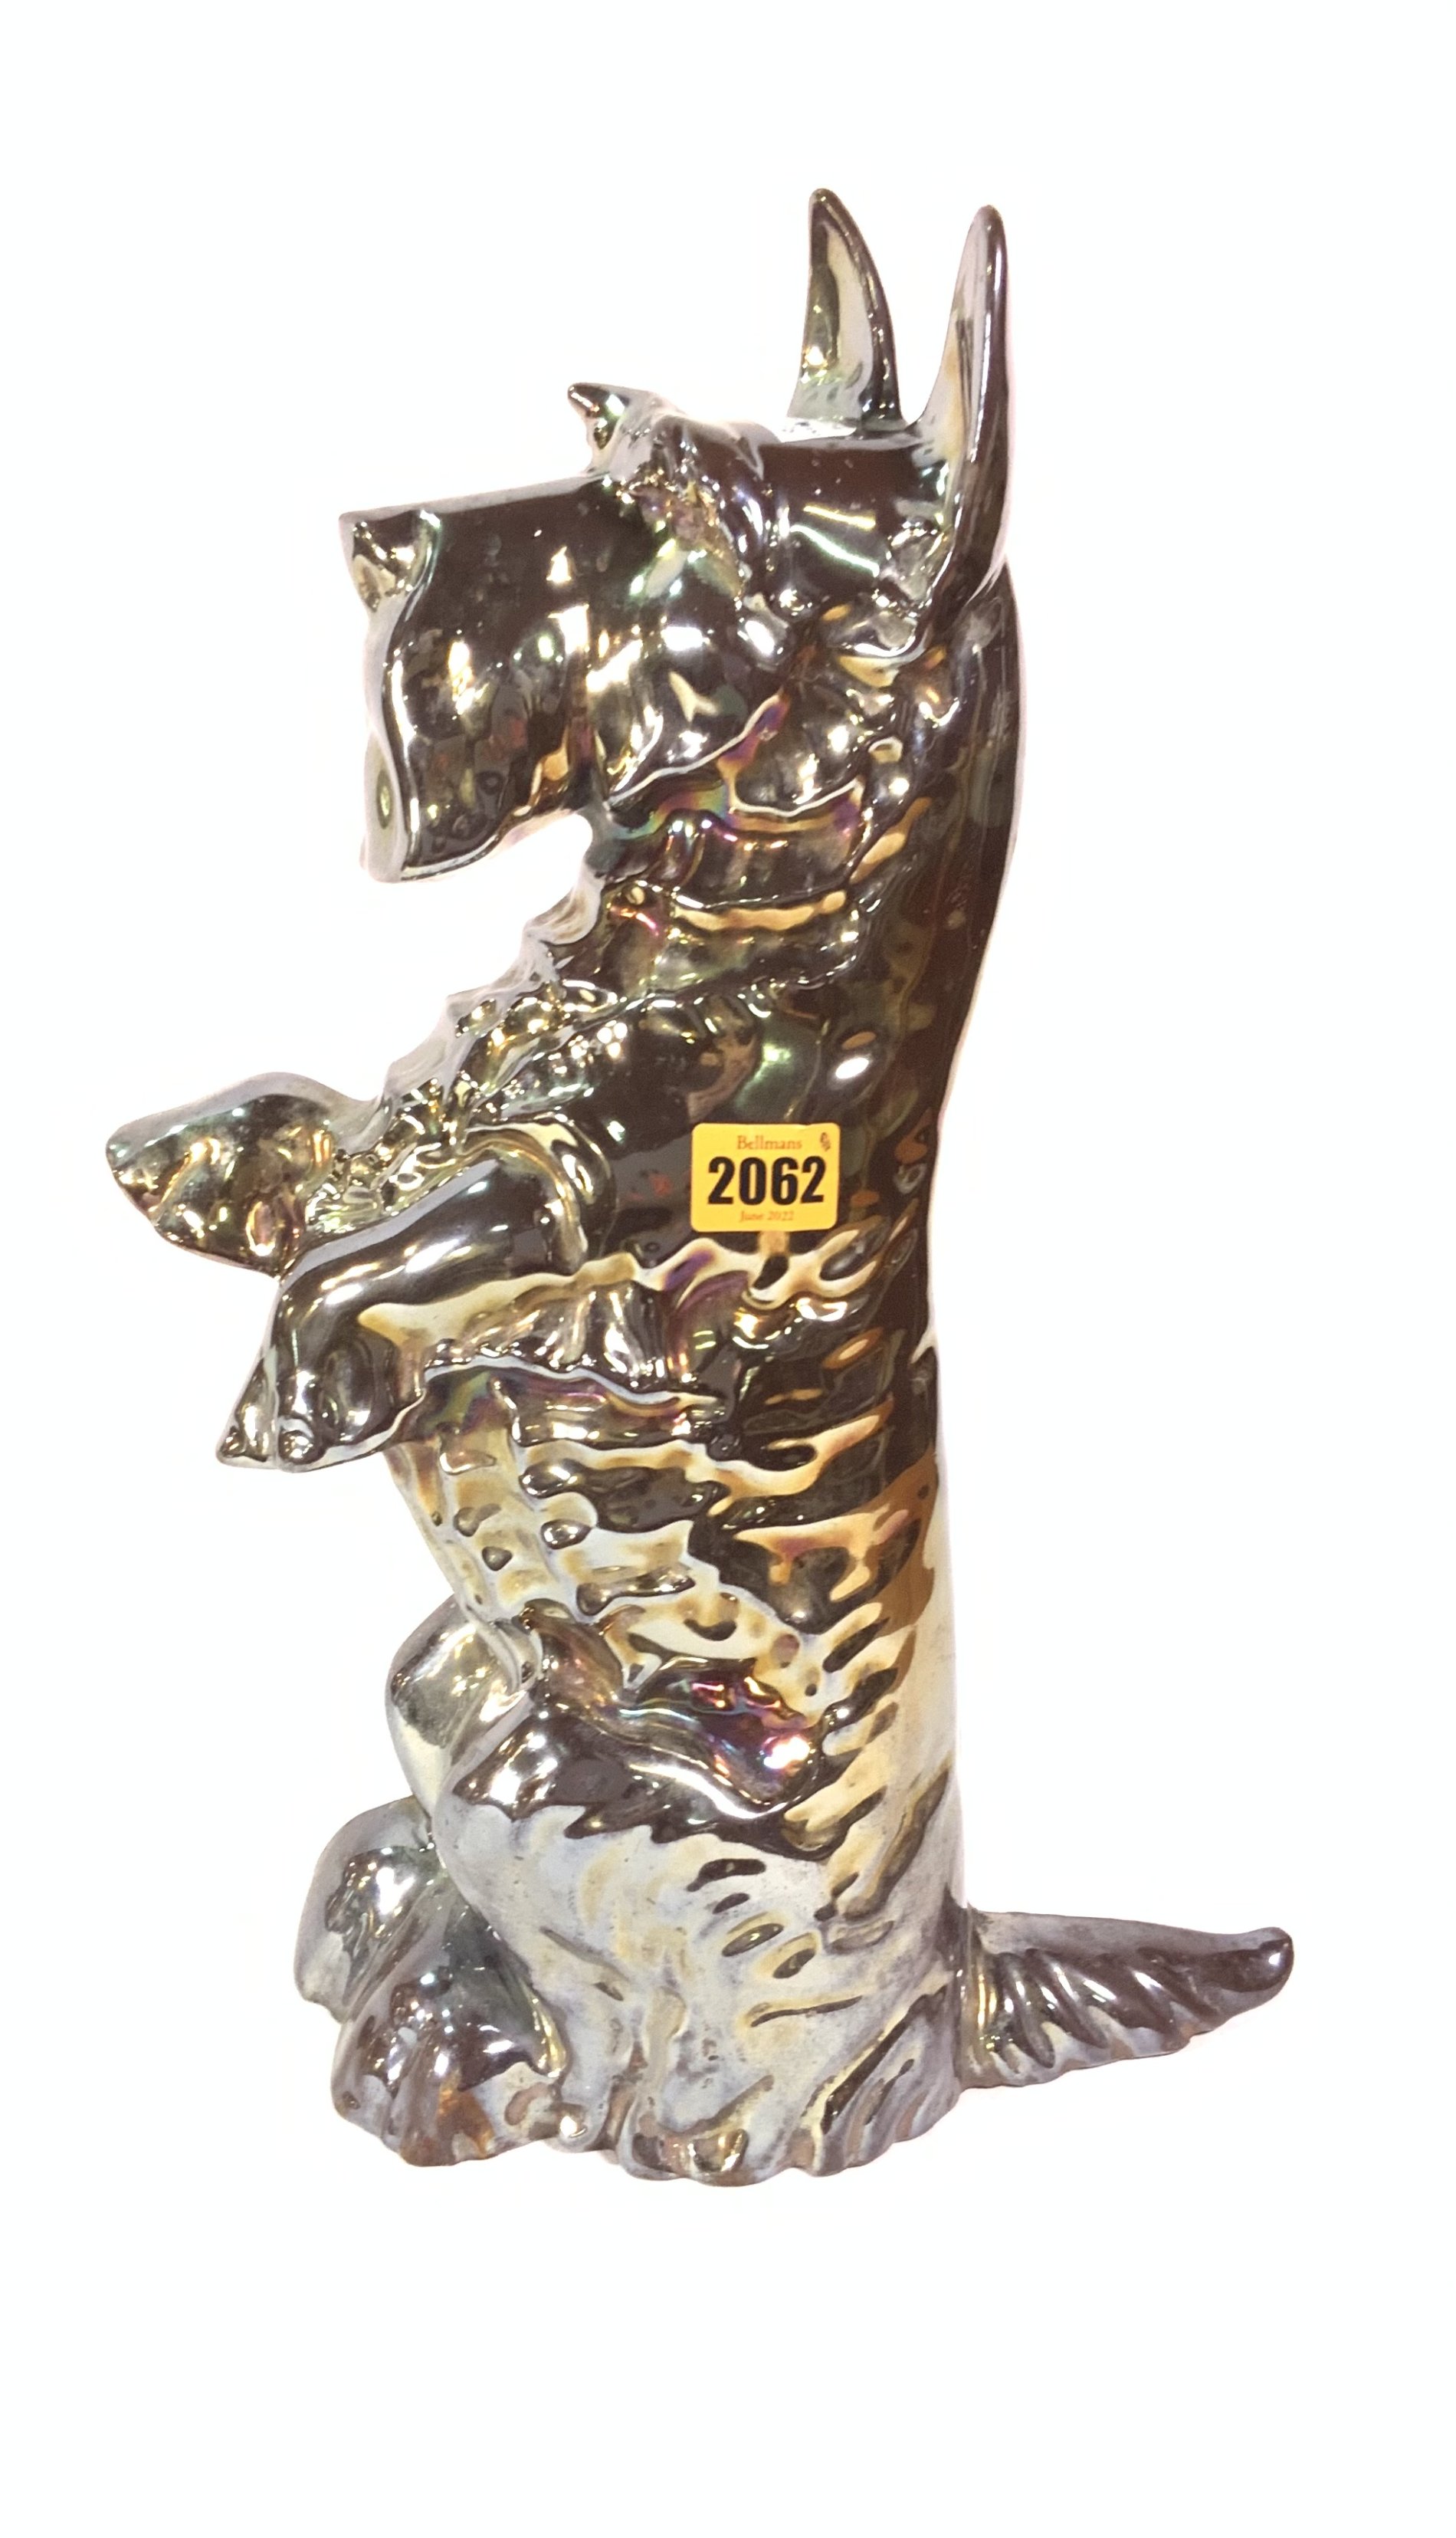 A MID-20TH CENTURY SILVER LUSTRE DOOR STOP FORMED AS A SCOTTY DOG